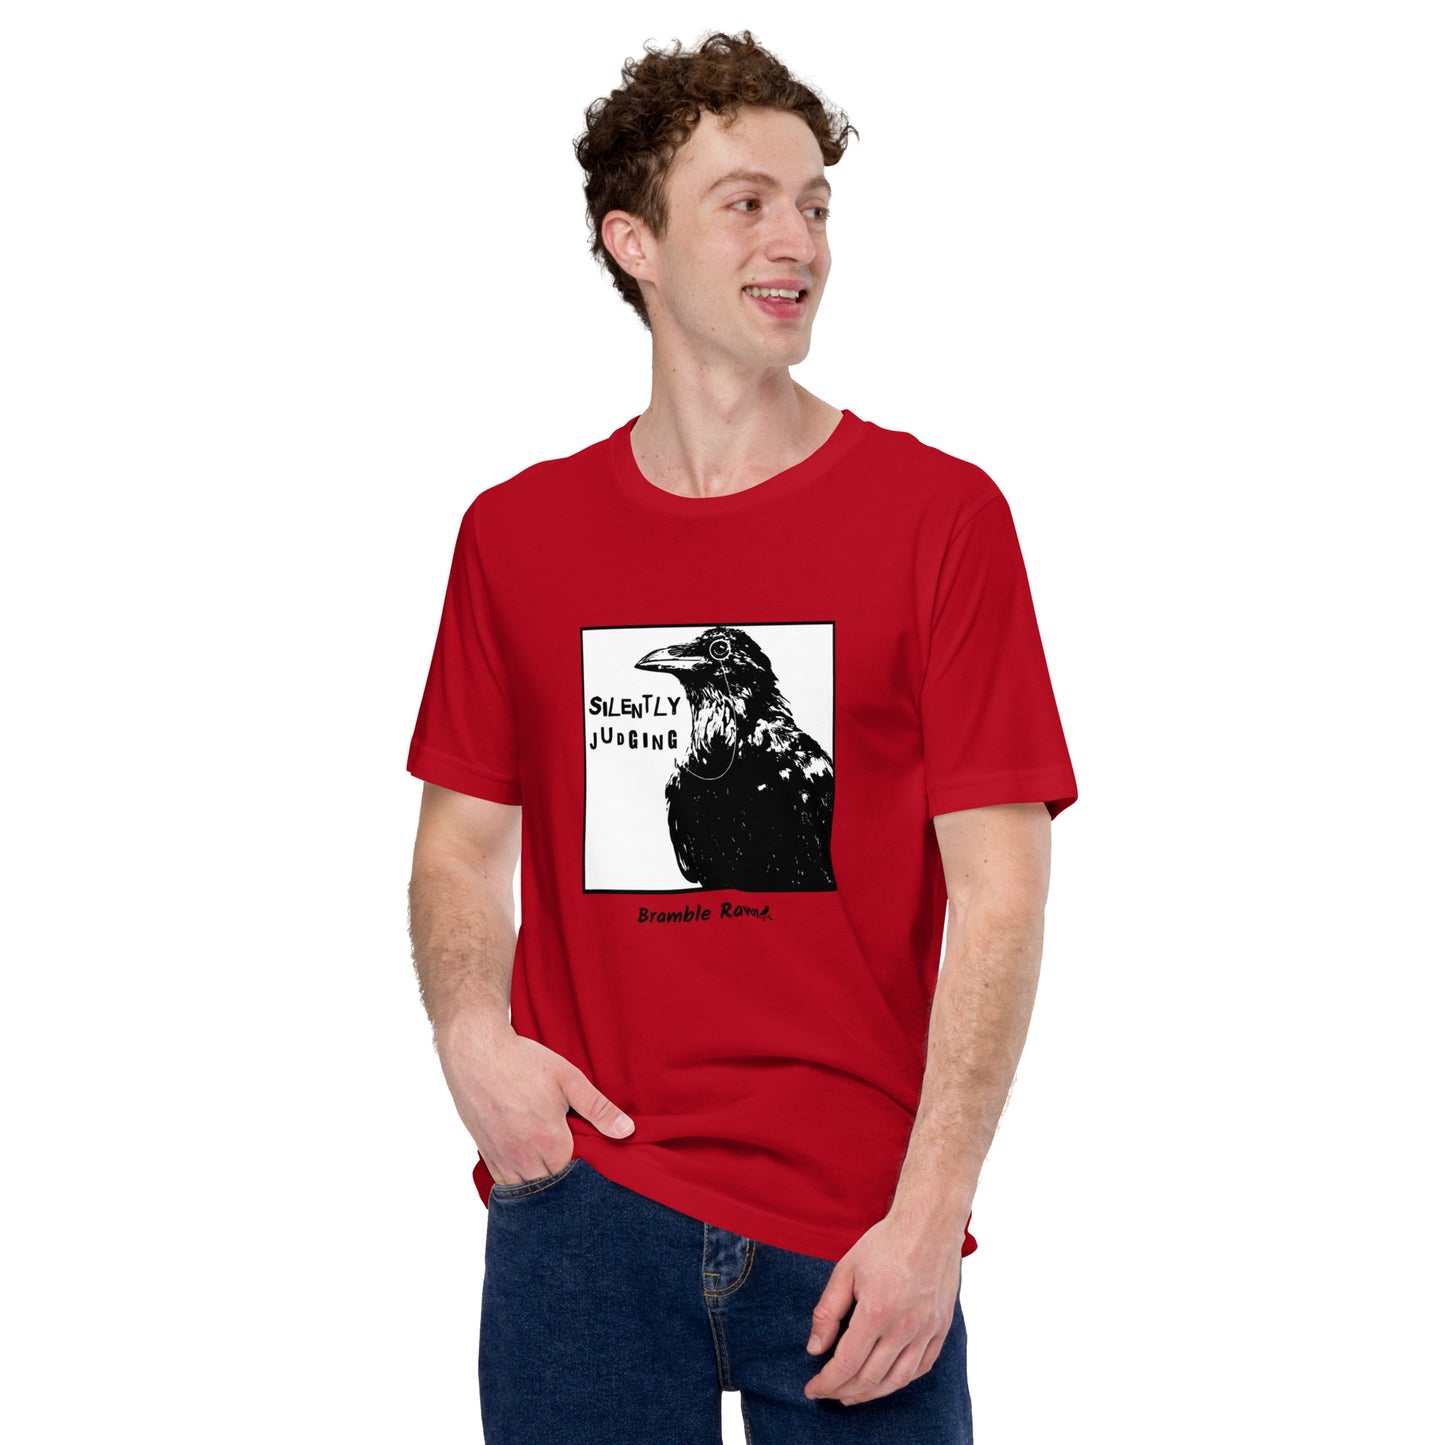 Unisex red colored t-shirt. Features silently judging text next to black crow wearing a monocle in a square frame on a white background.  Shown on male model.